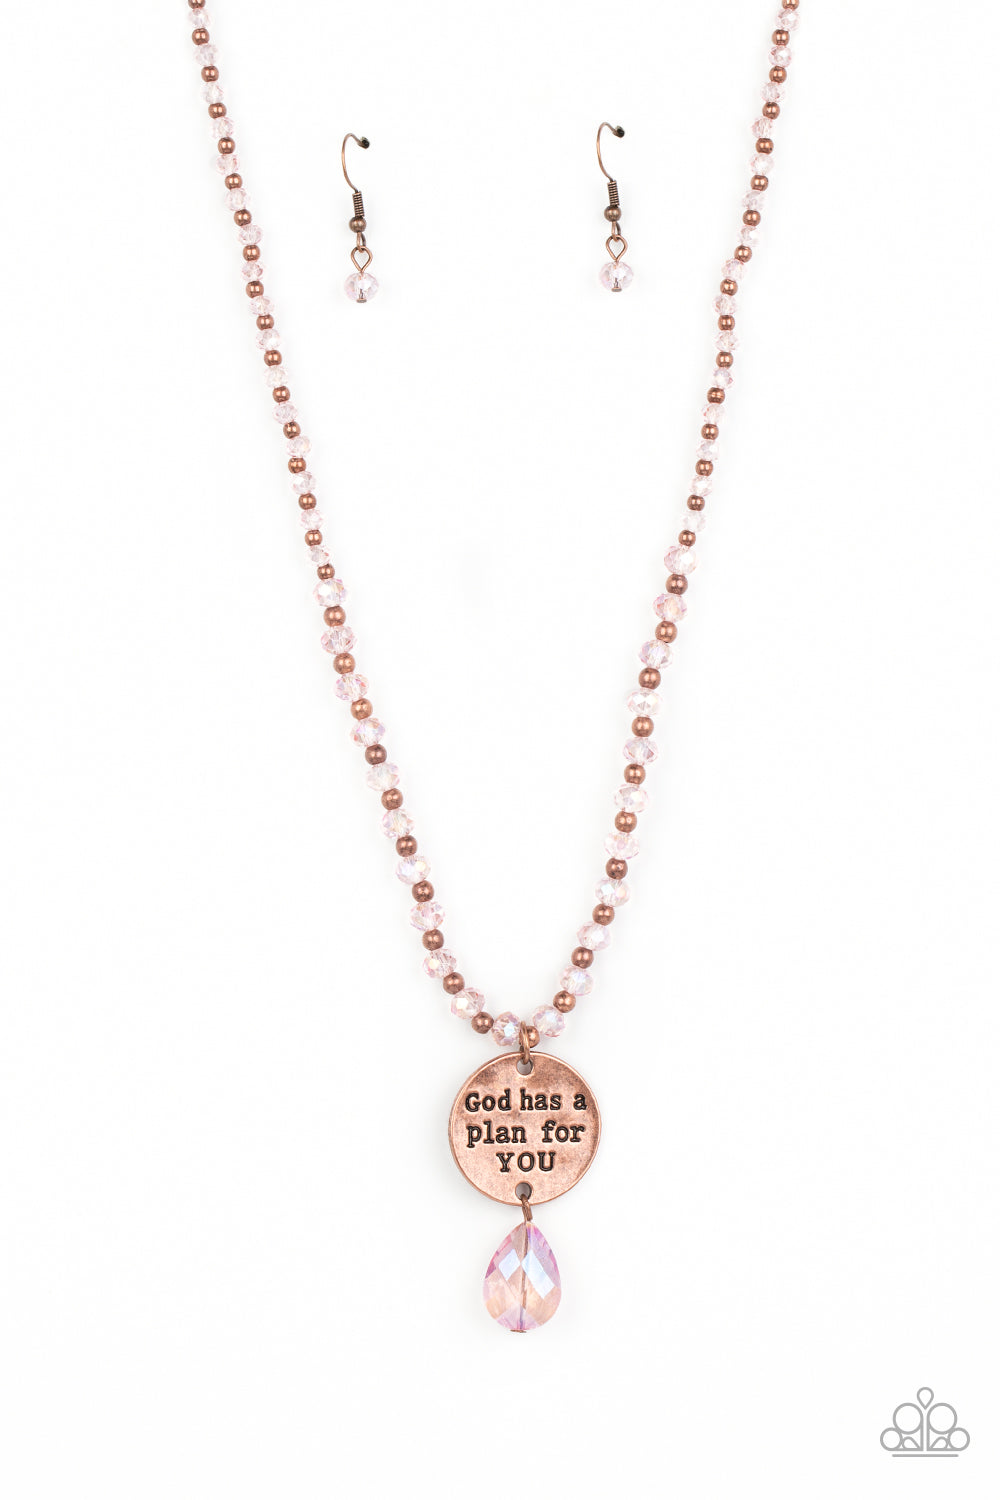 Priceless Plan - Copper Beads, Pink Faceted Beads, "God has a plan for YOU" Pendant Paparazzi Necklace & matching earrings